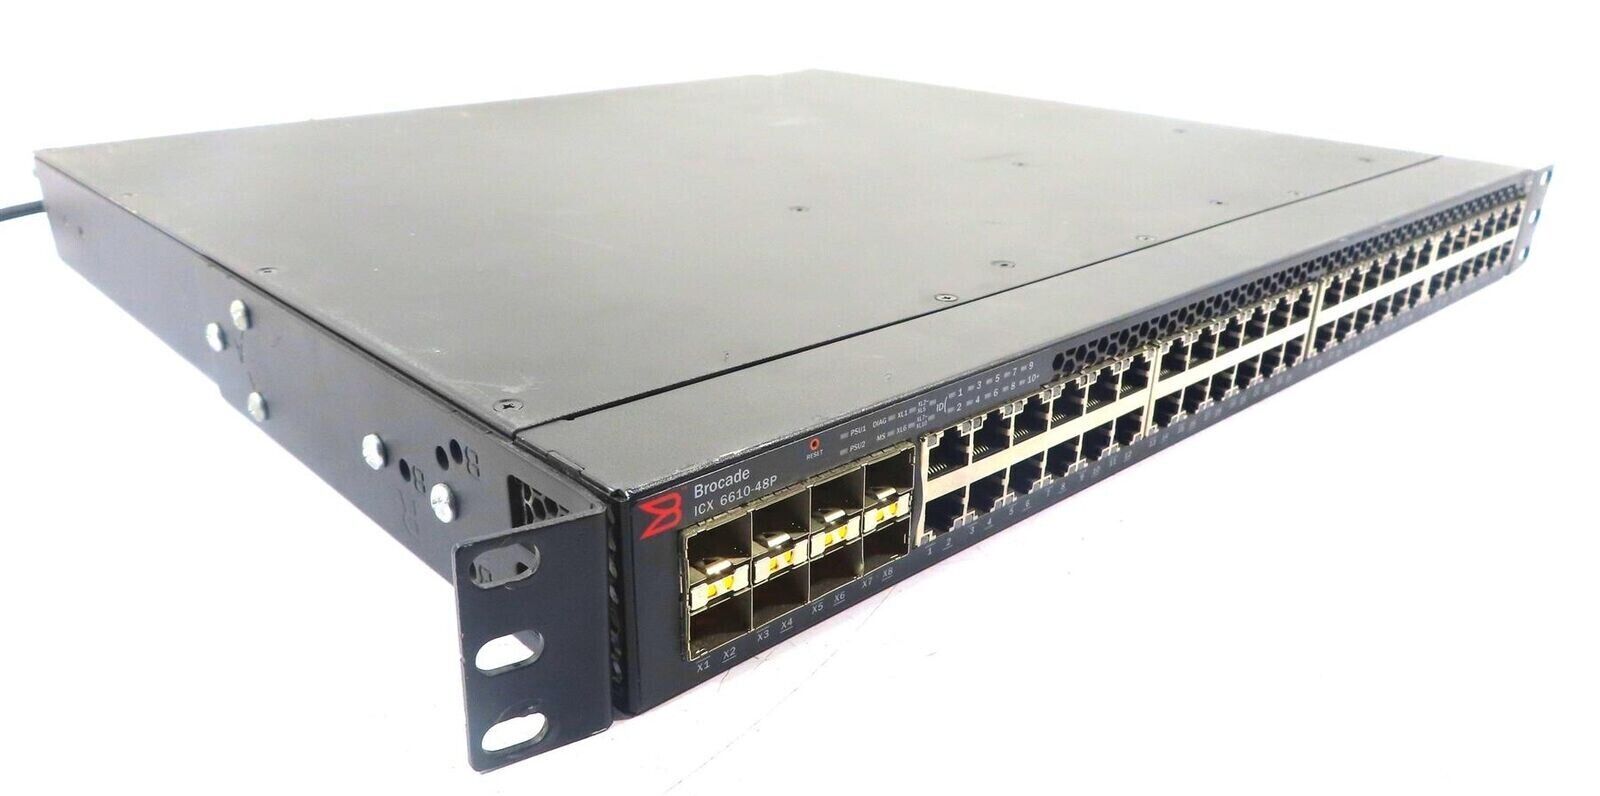 Brocade ICX6610-48P-E 48-port PoE+ Gigabit Ethernet Switch 8x SFP+ 10GbE with PSU (Used) - image 1 of 3